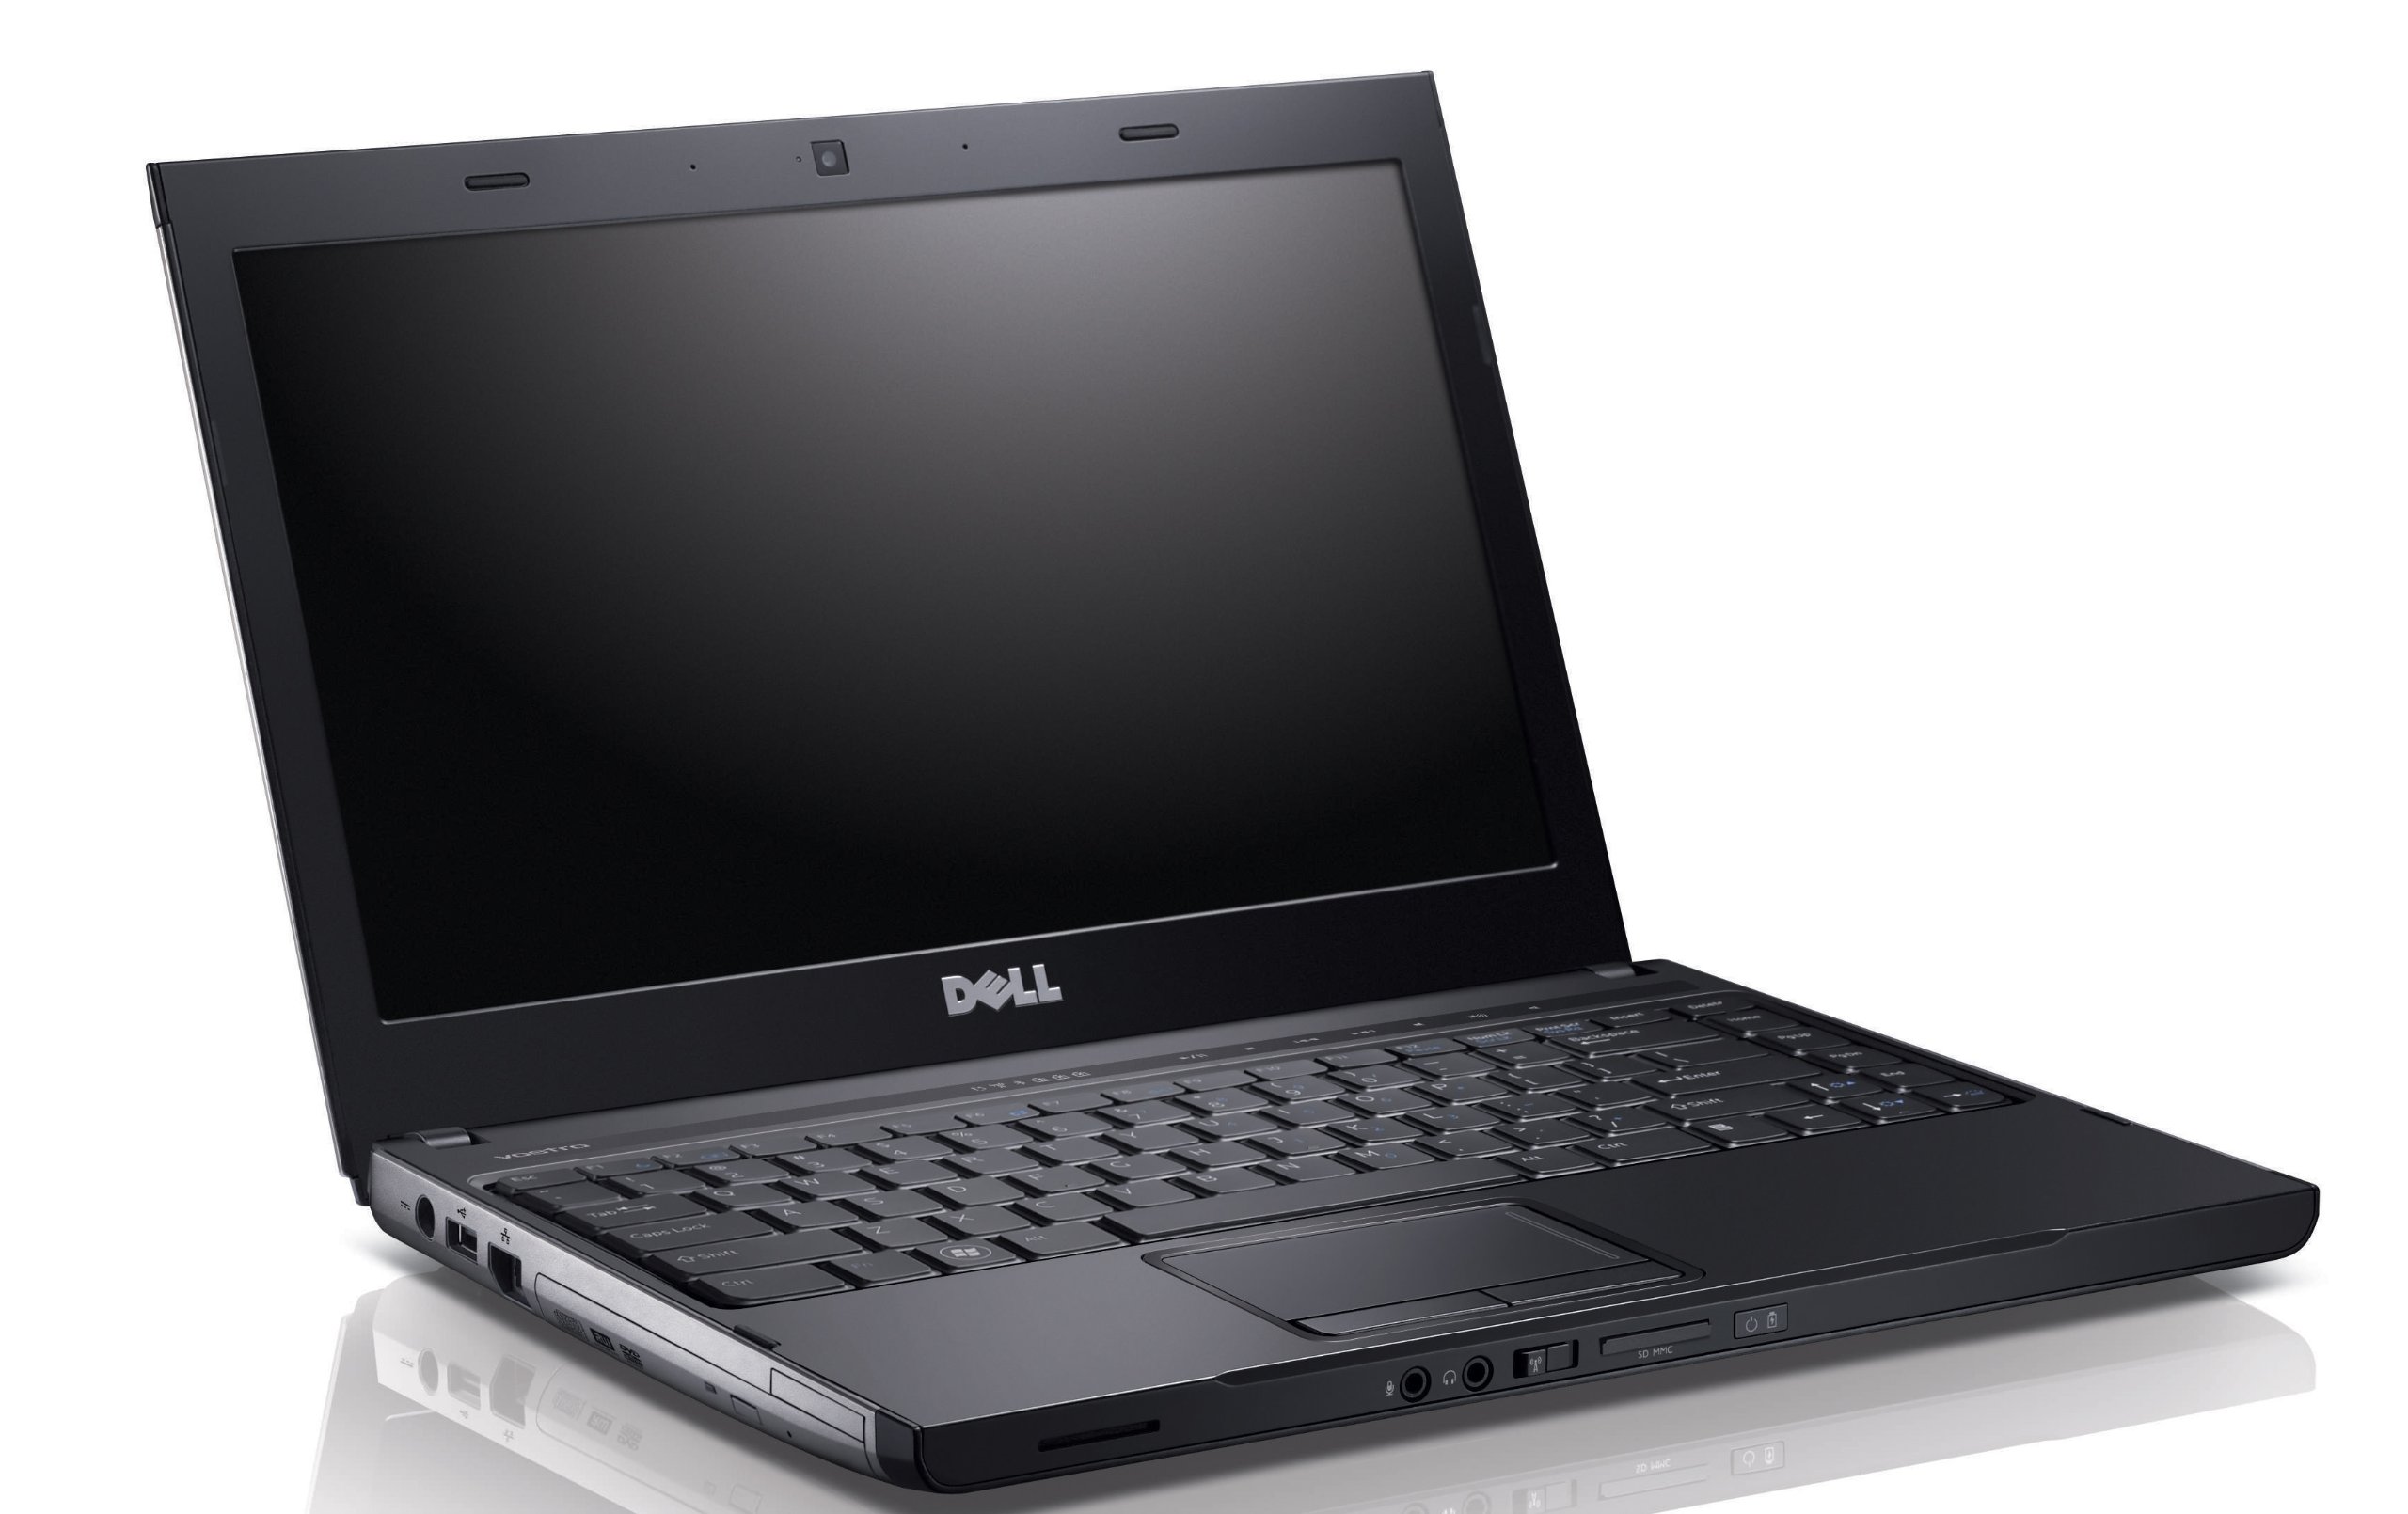 Dell Vostro 3500 DDR3 Notebook